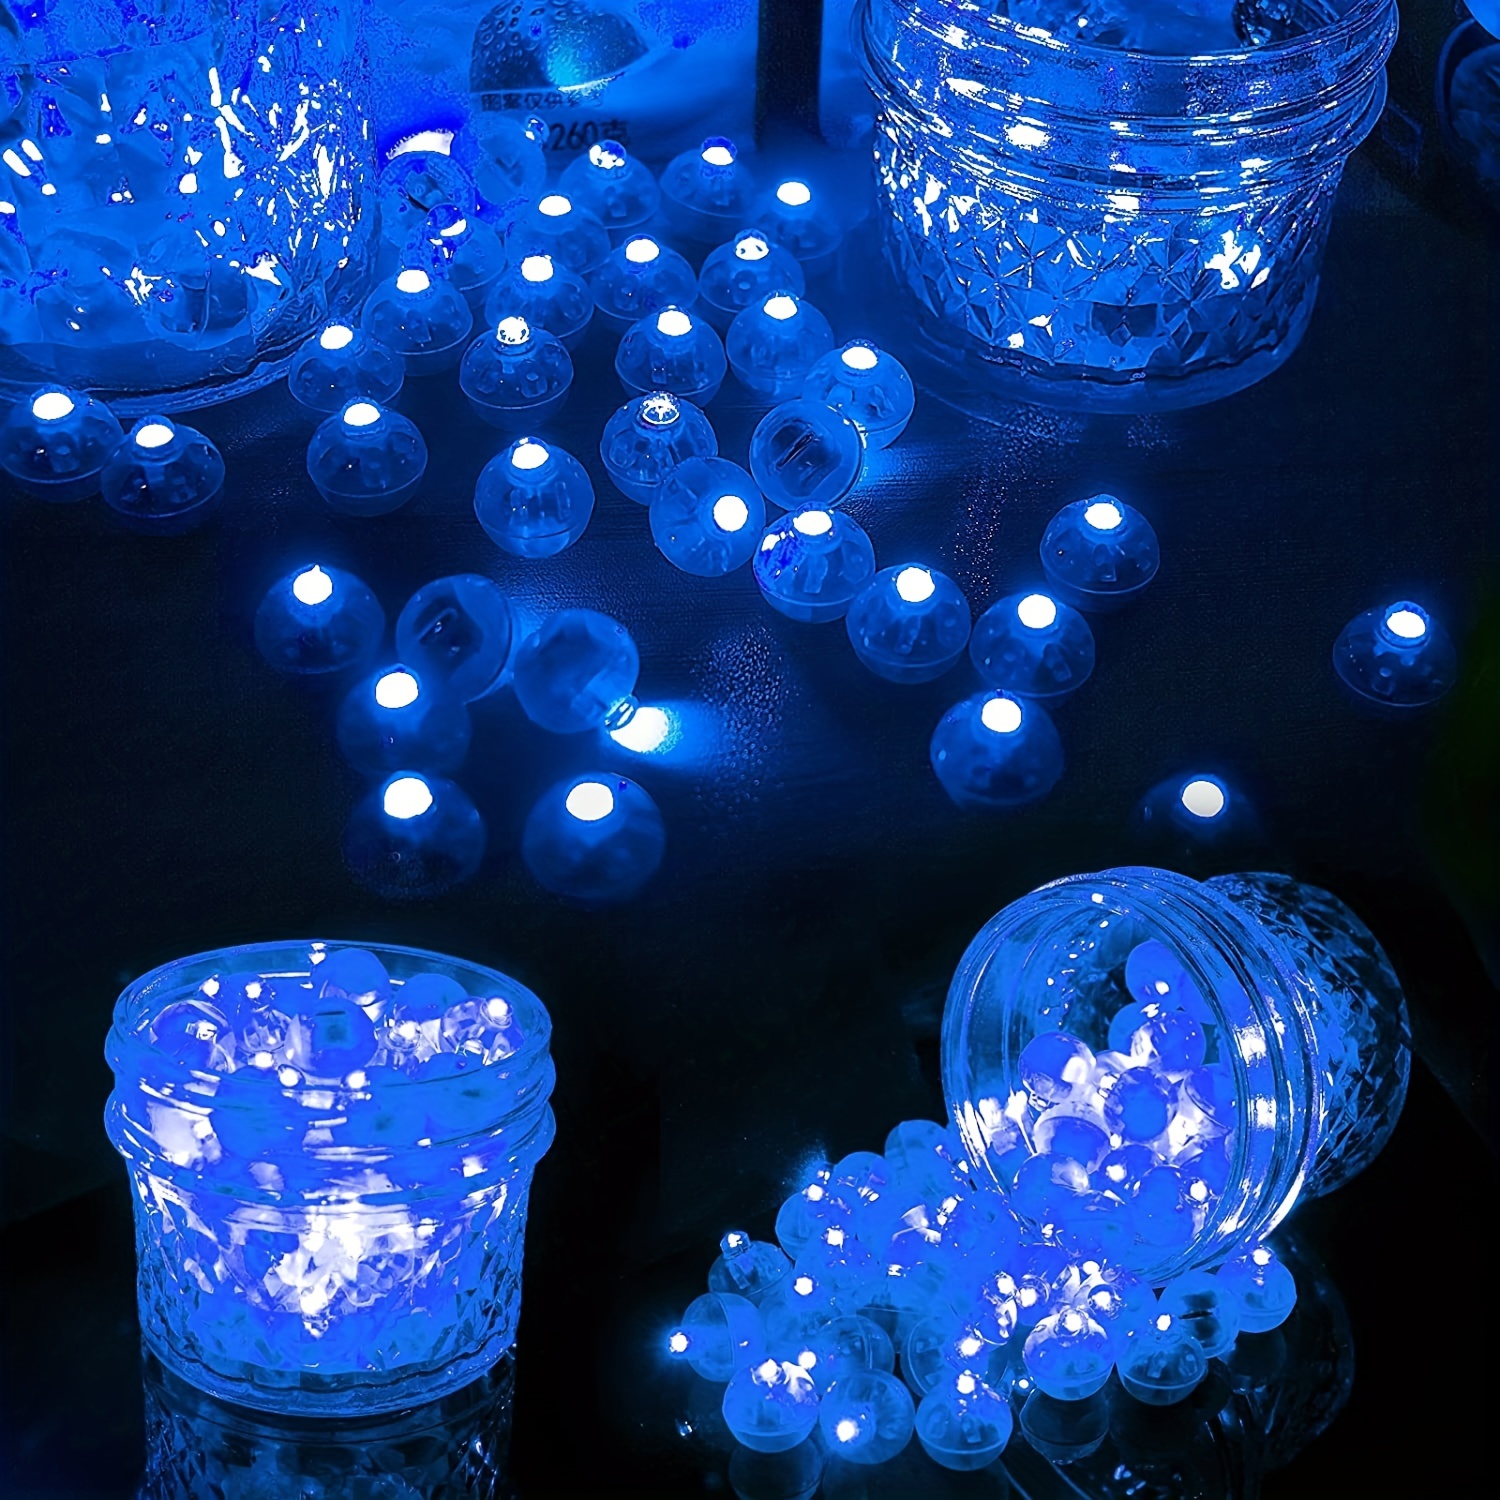 20 50pcs 7 colors balloon lights long standby time mini ball light round led flash lamp for party wedding birthday festival new year and christmas halloween decorations details 8